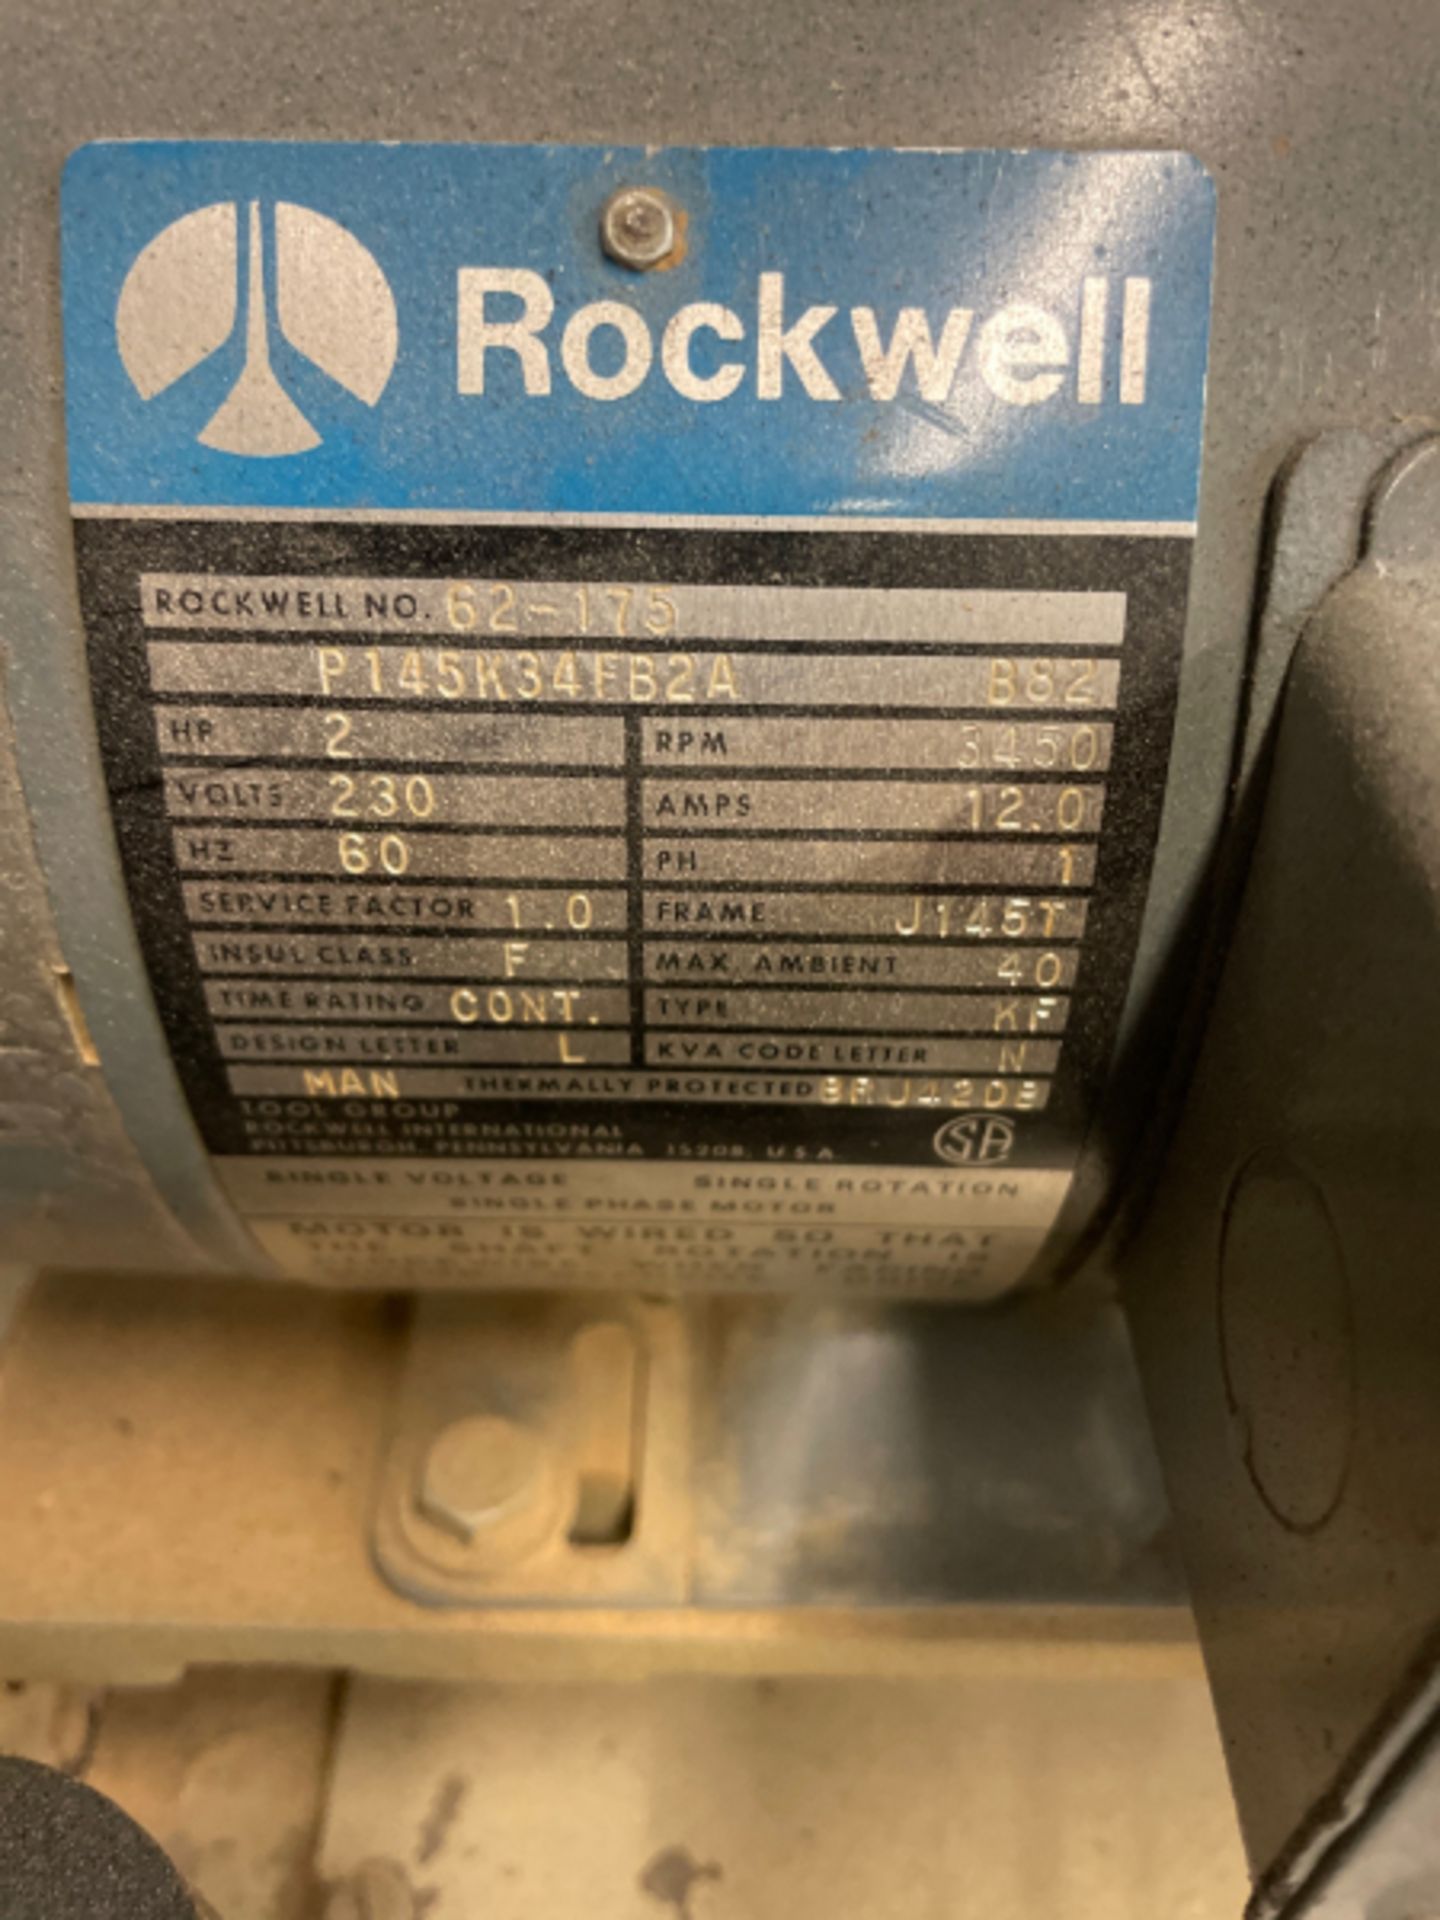 Rockwell 13” Planer - Image 6 of 6